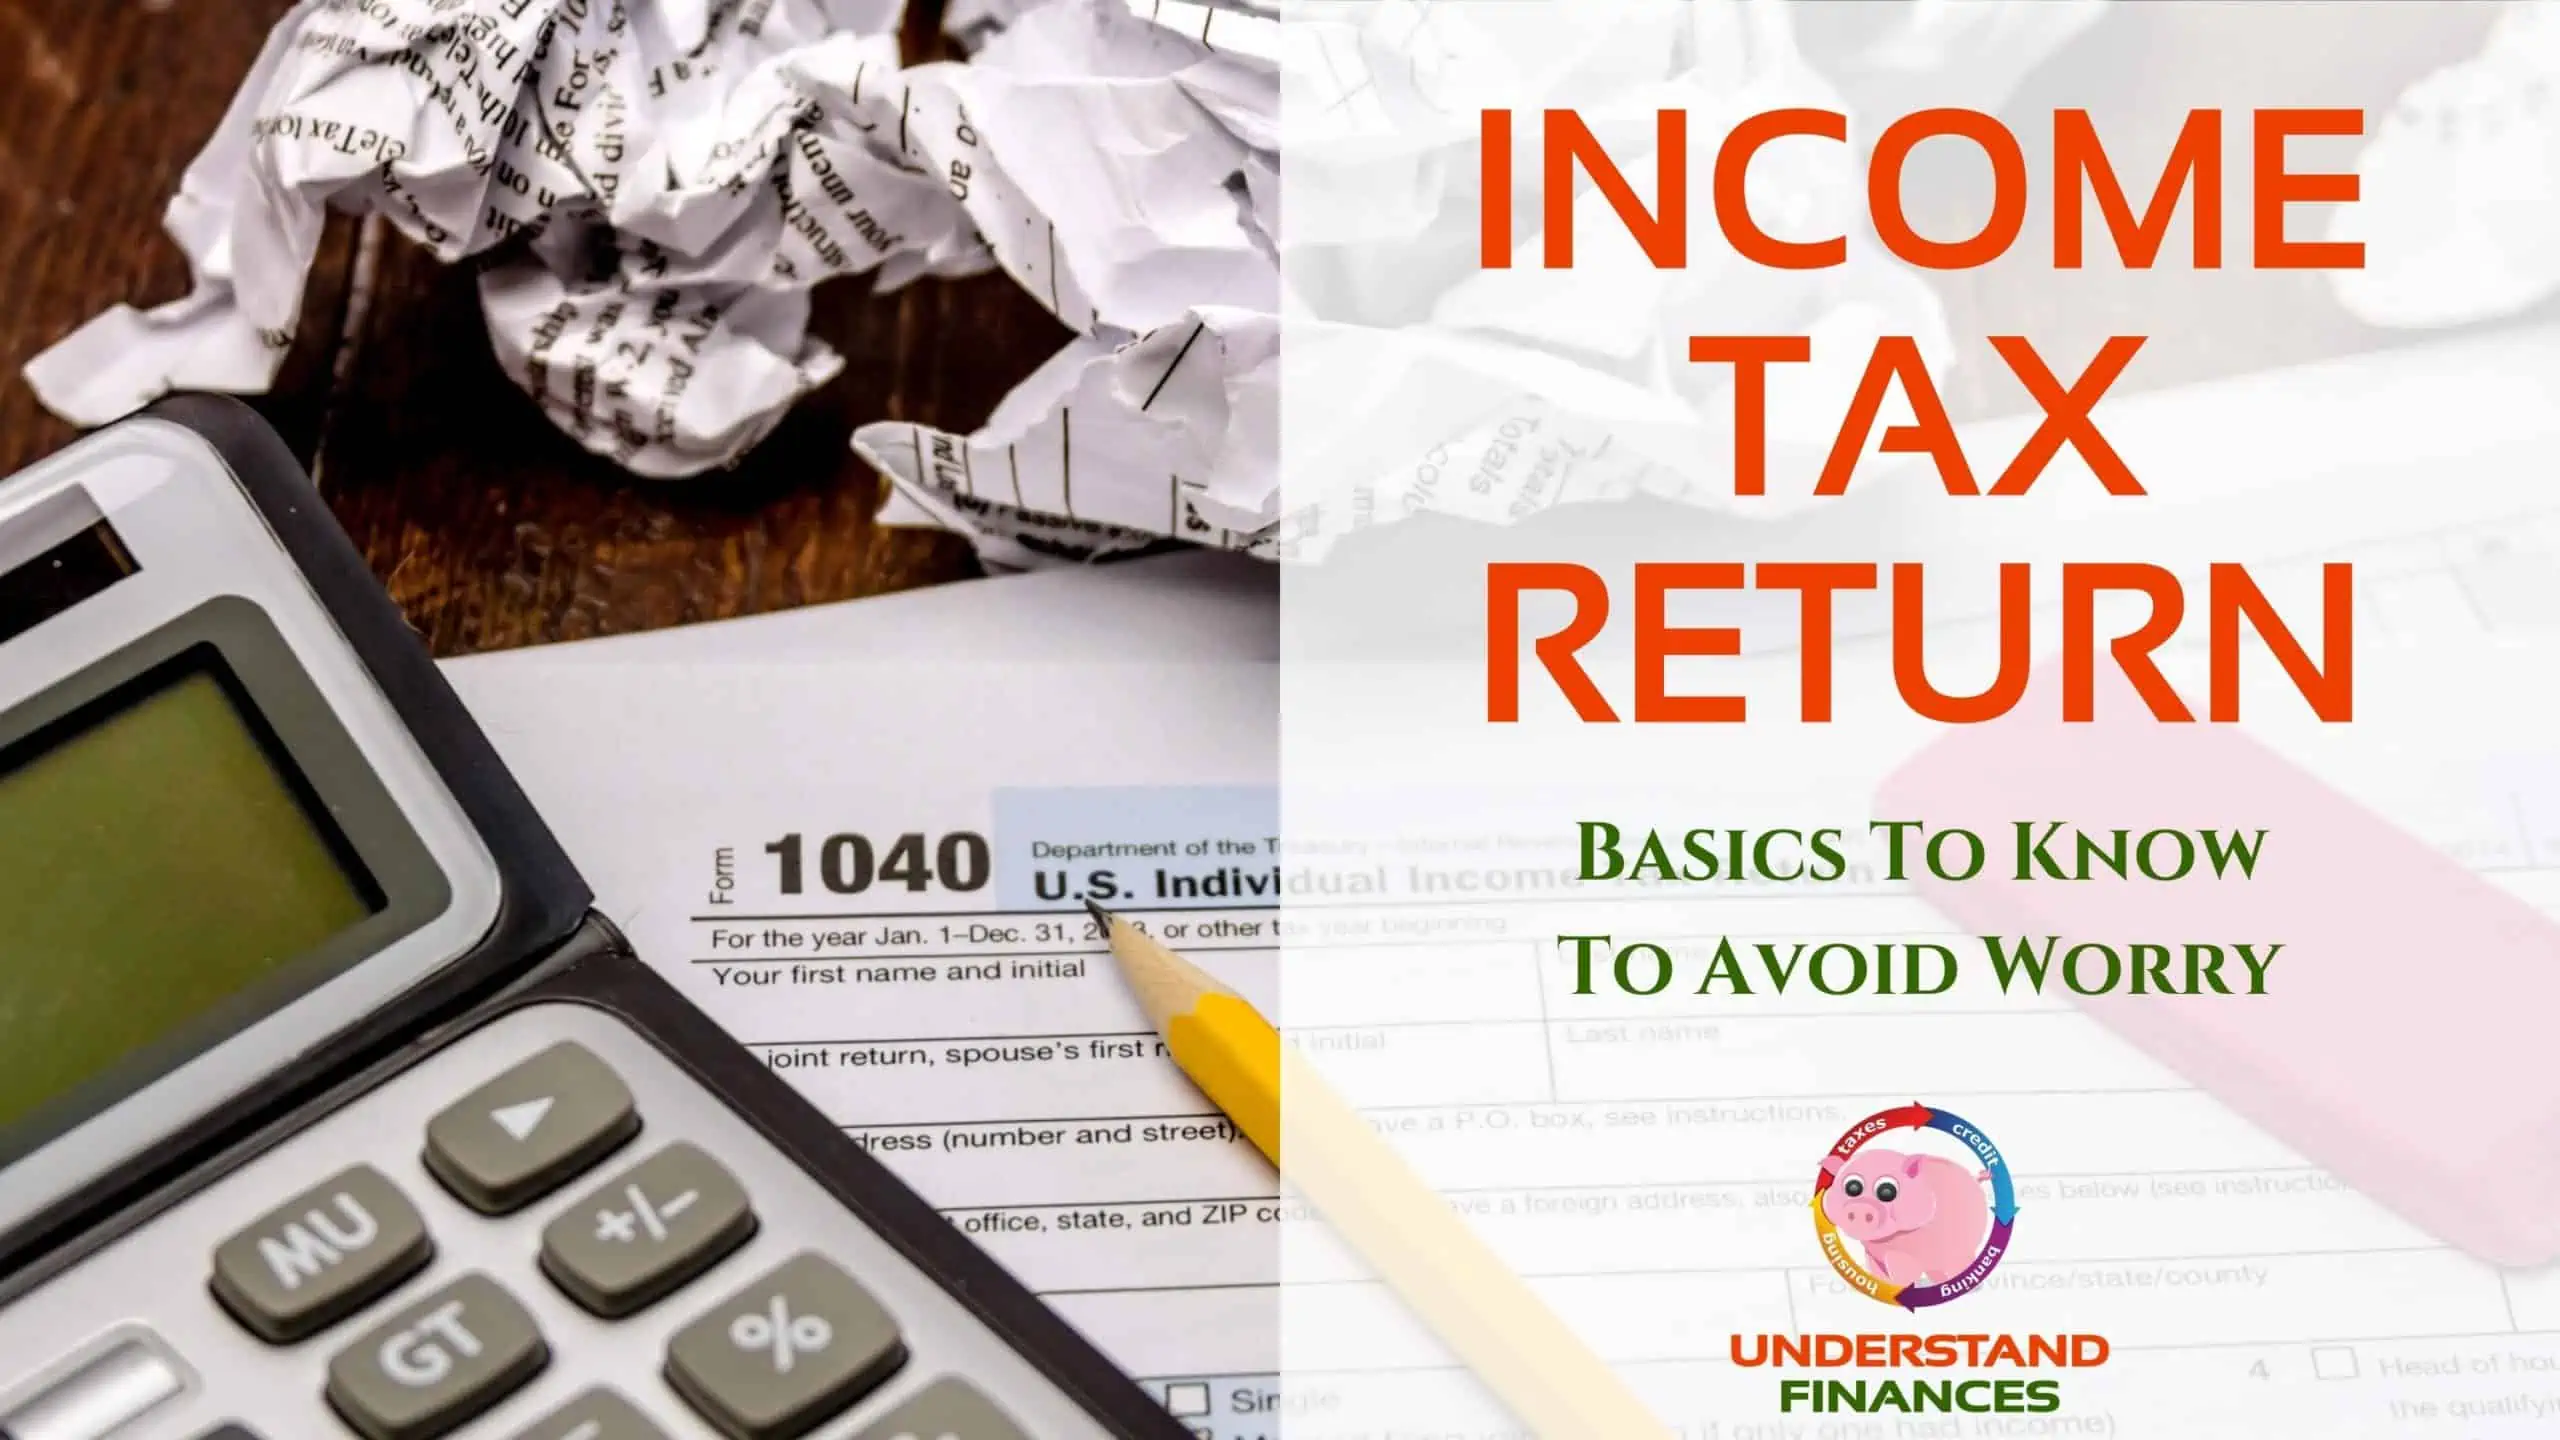 Income Tax Return Basics To Know To Avoid Worry